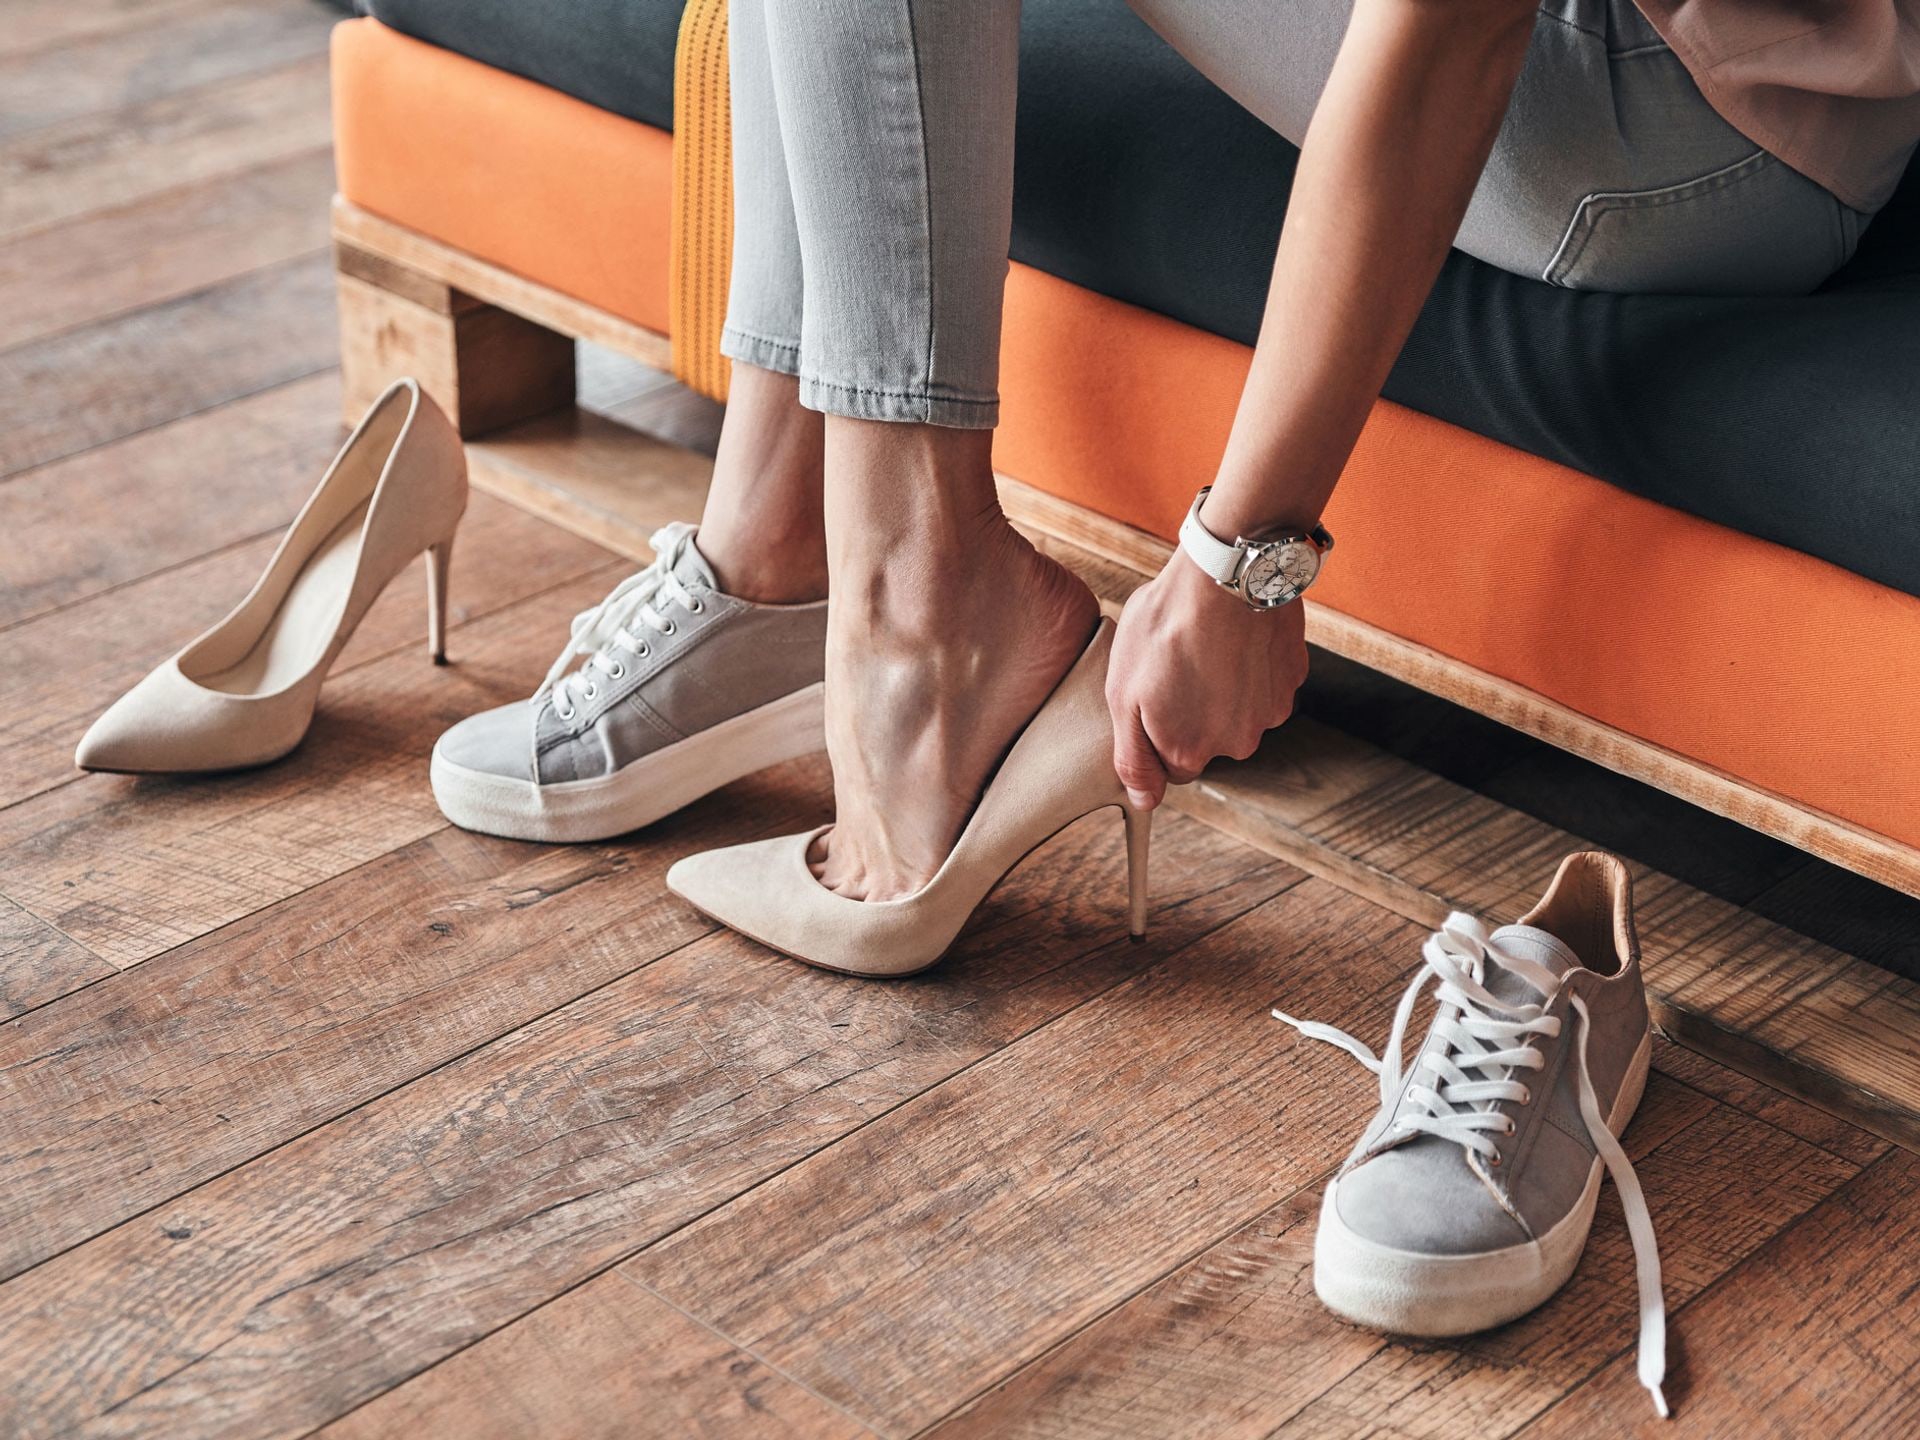 The Best-selling Dream Pairs Low Heels Are Up to 56 Percent Off